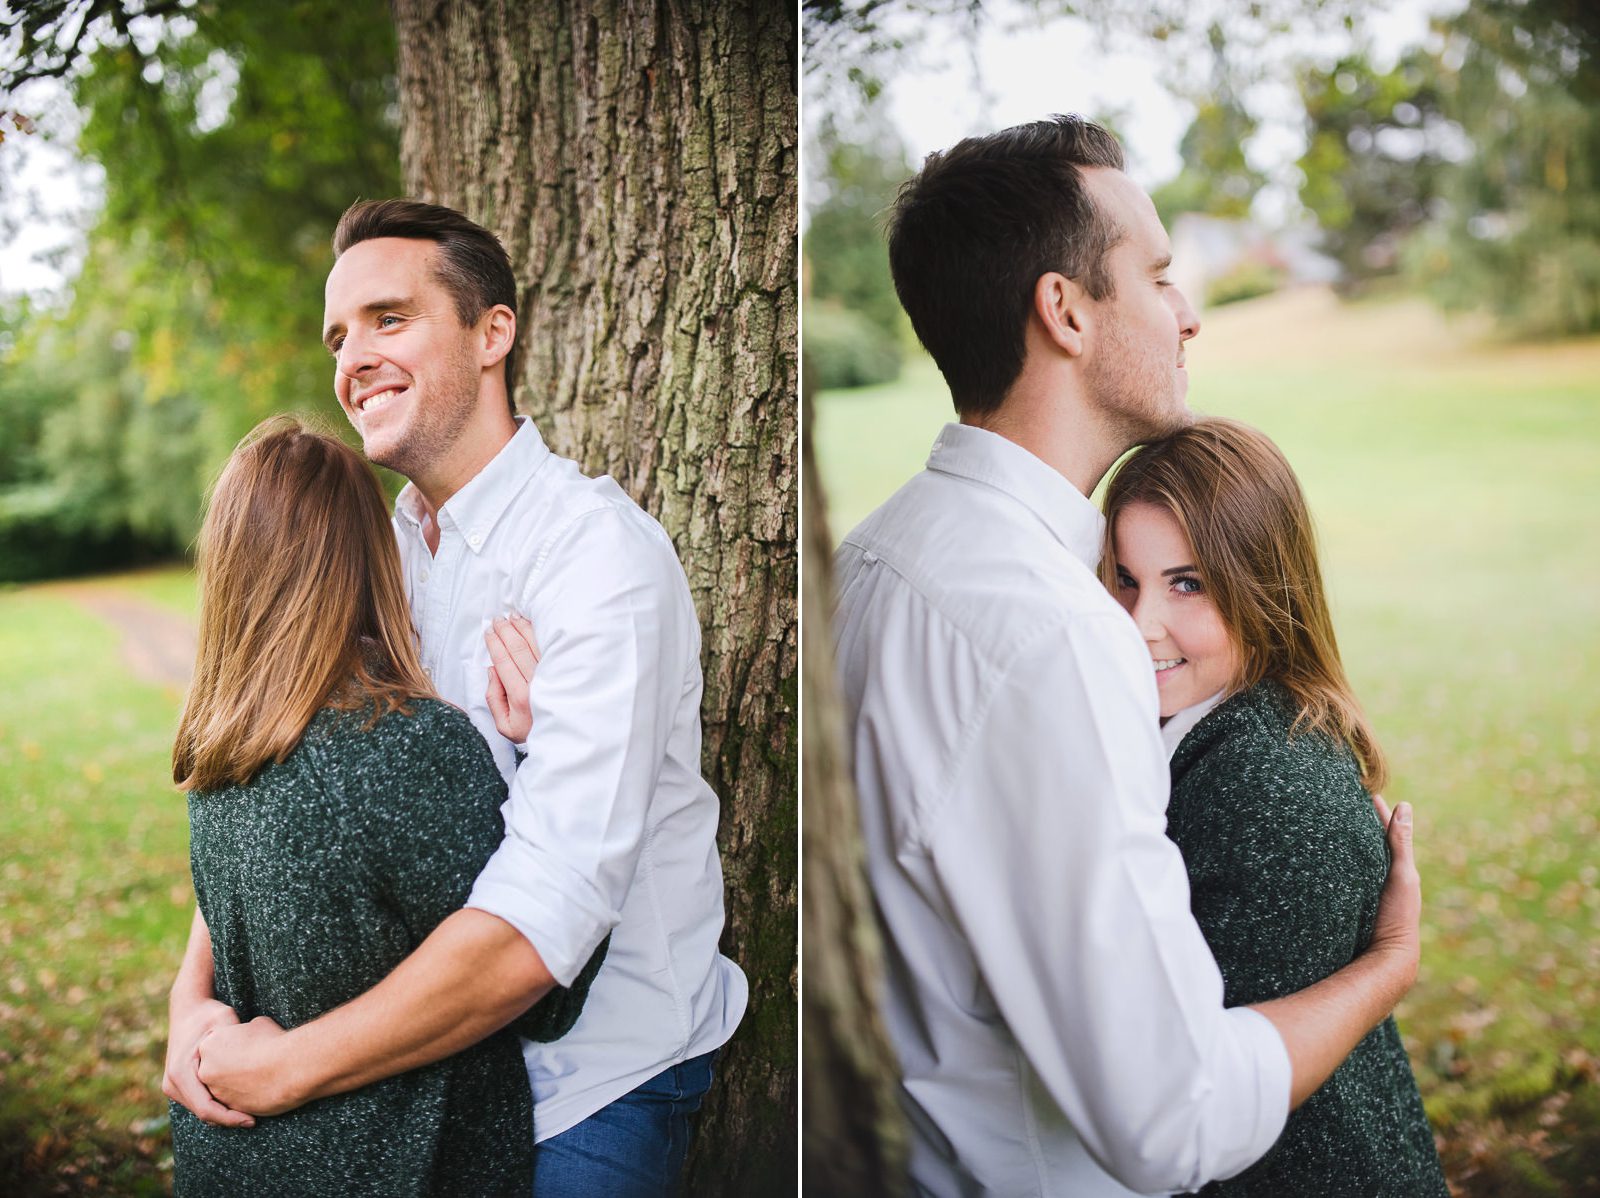 Relaxed and intimate engagement photography